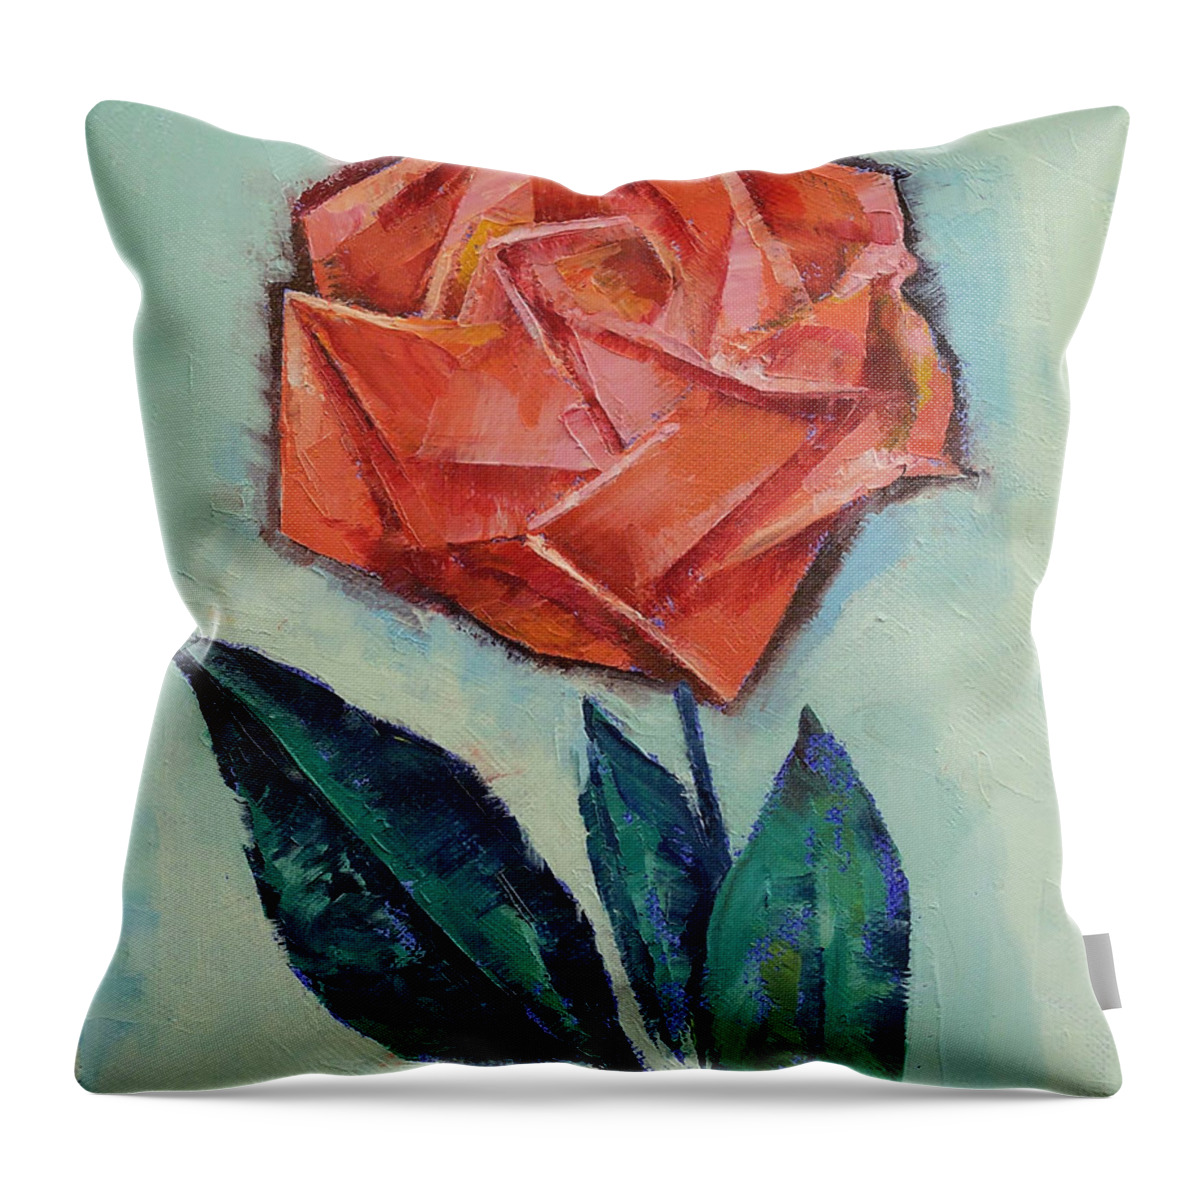 Origami Throw Pillow featuring the painting Origami Rose by Michael Creese